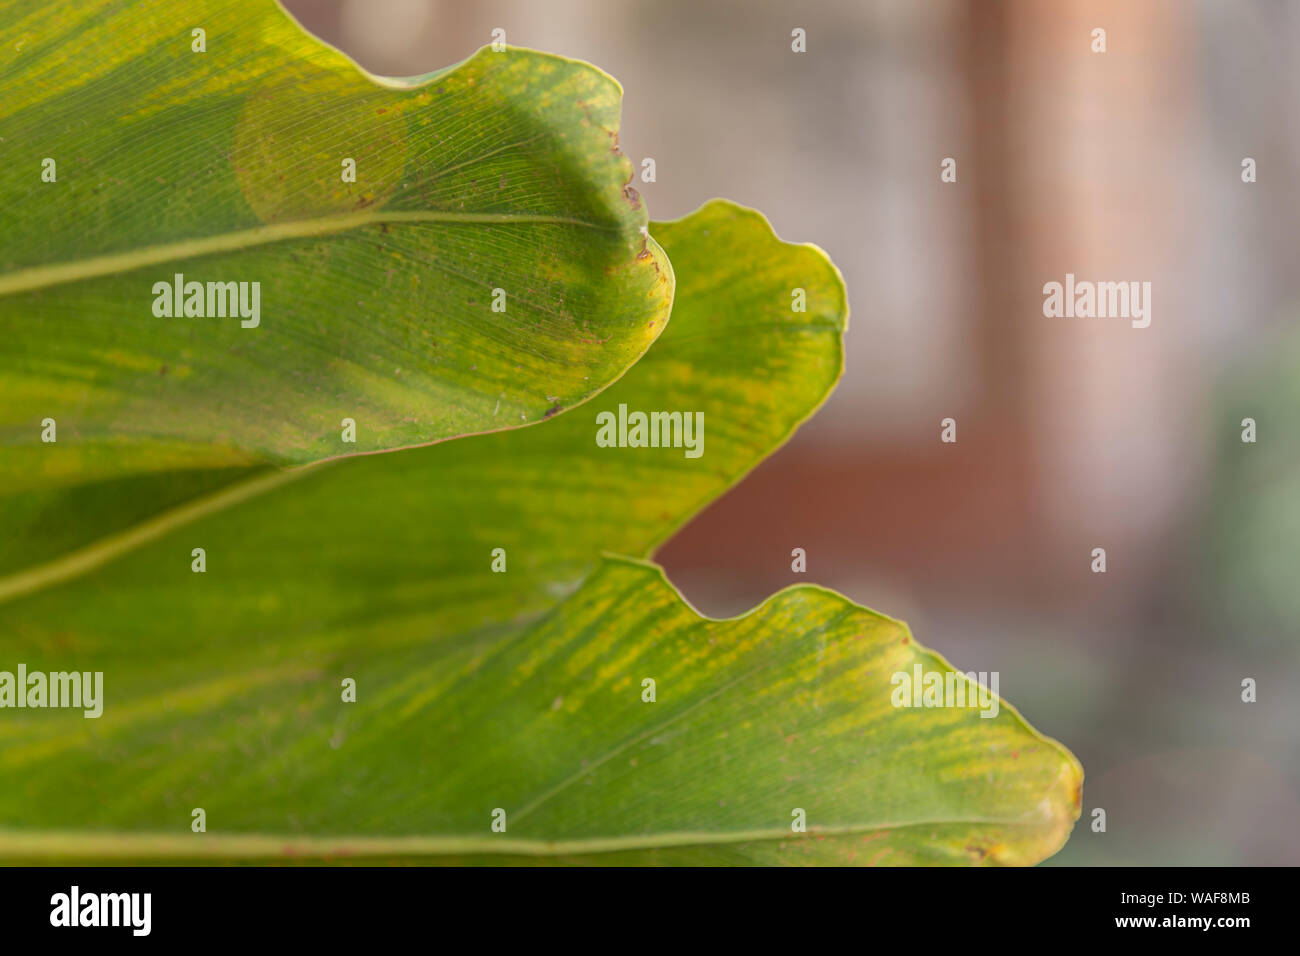 Big green leaf with veins details Stock Photo